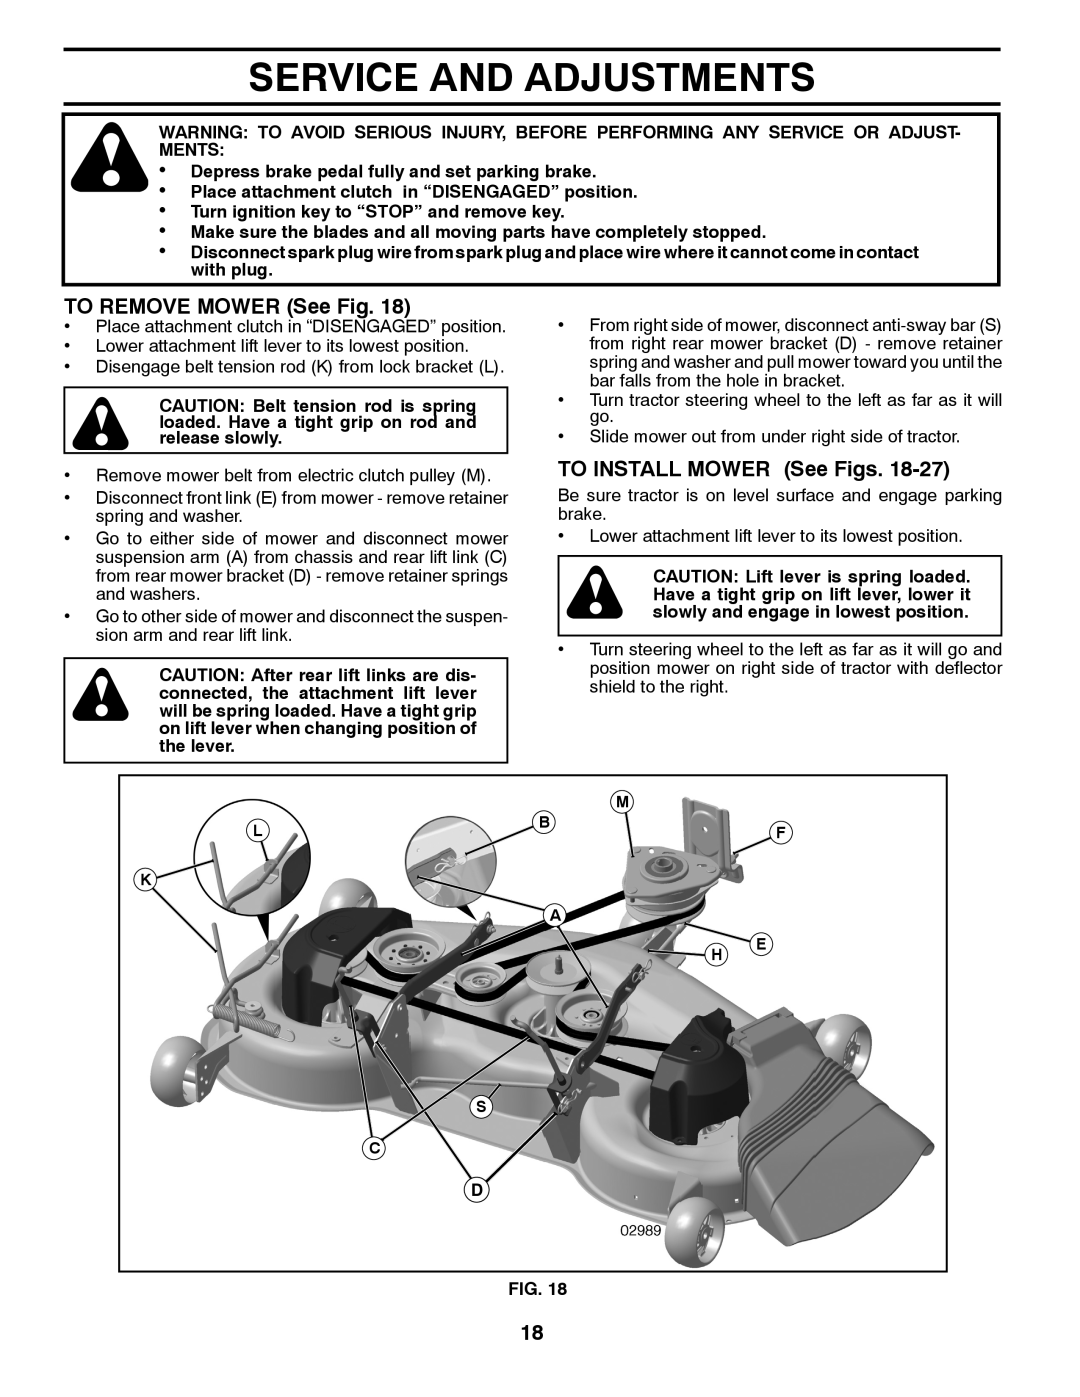 Husqvarna 96045000504, 532424761R1 owner manual Service And Adjustments, TO REMOVE MOWER See Fig, TO INSTALL MOWER See Figs 